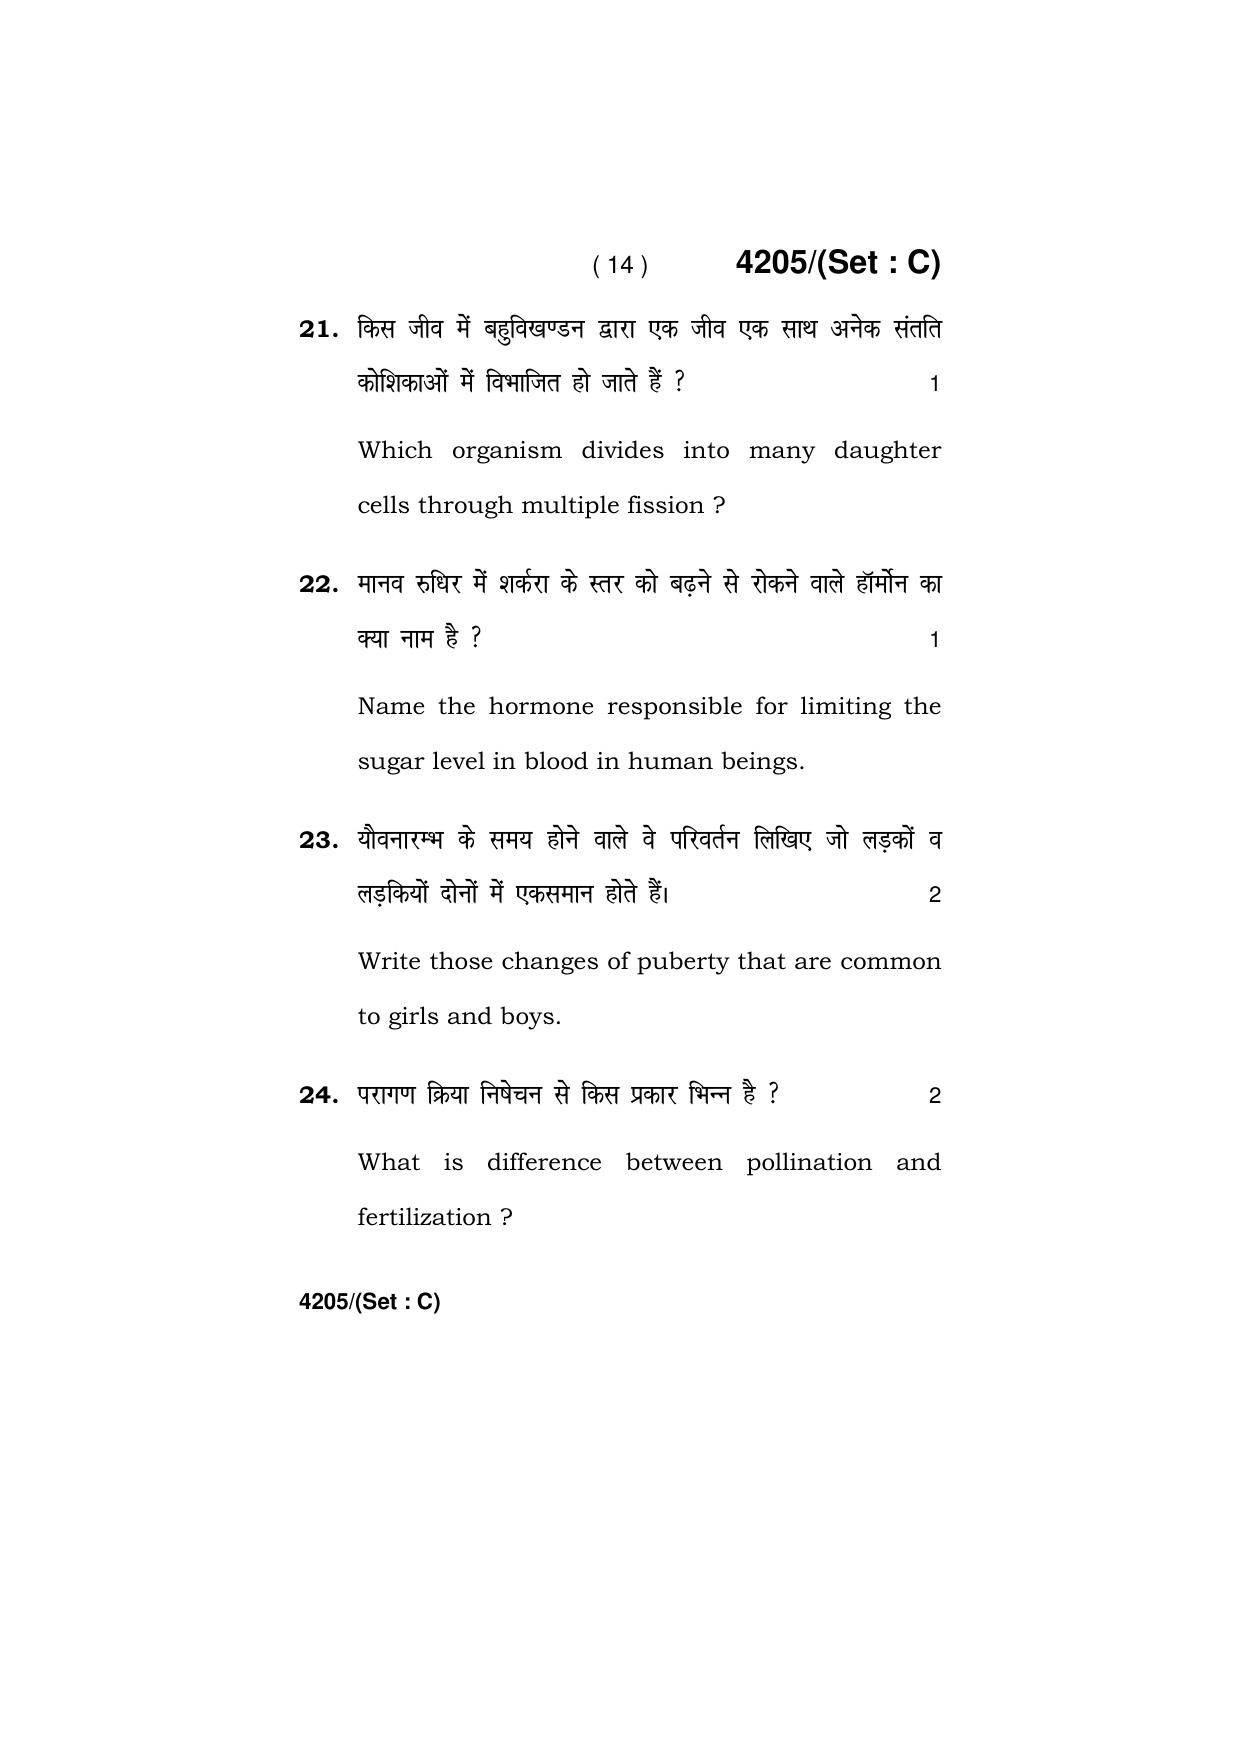 Haryana Board HBSE Class 10 Science (All Set) 2019 Question Paper - Page 46